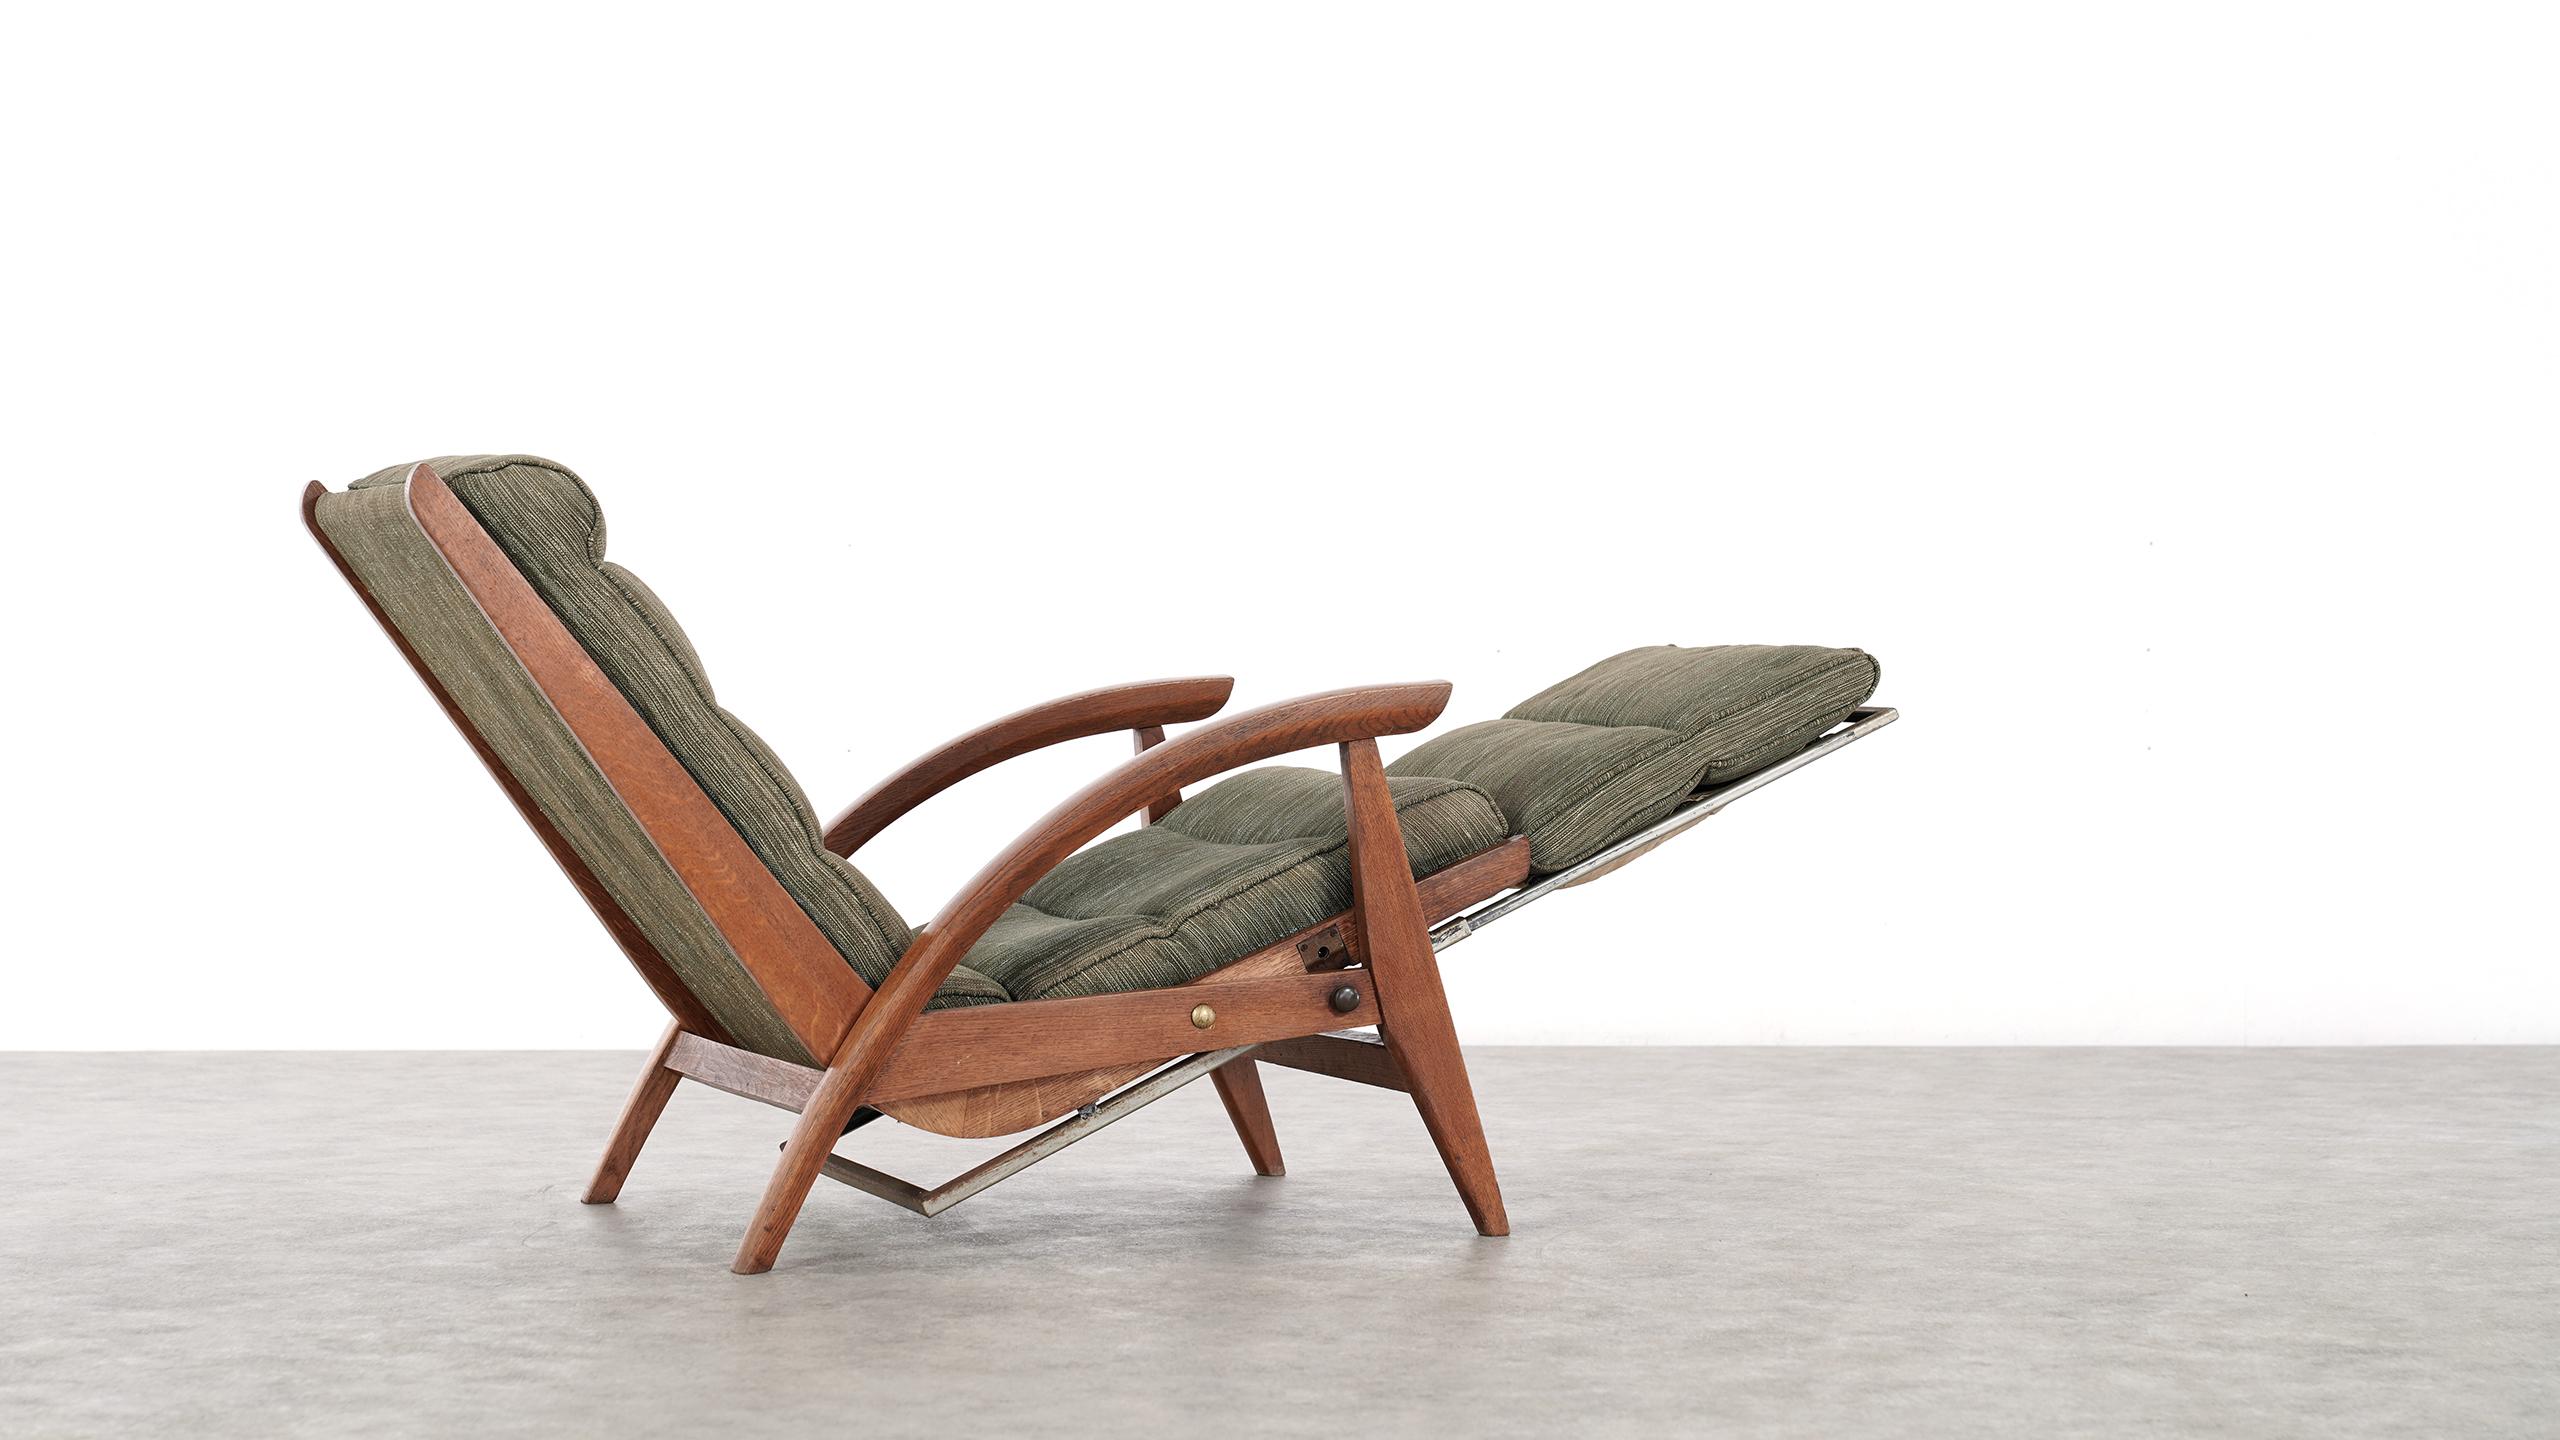 Guy Besnard FS 134 Reclining Lounge Chair, 1954 for Free Span, France Prouvé 2